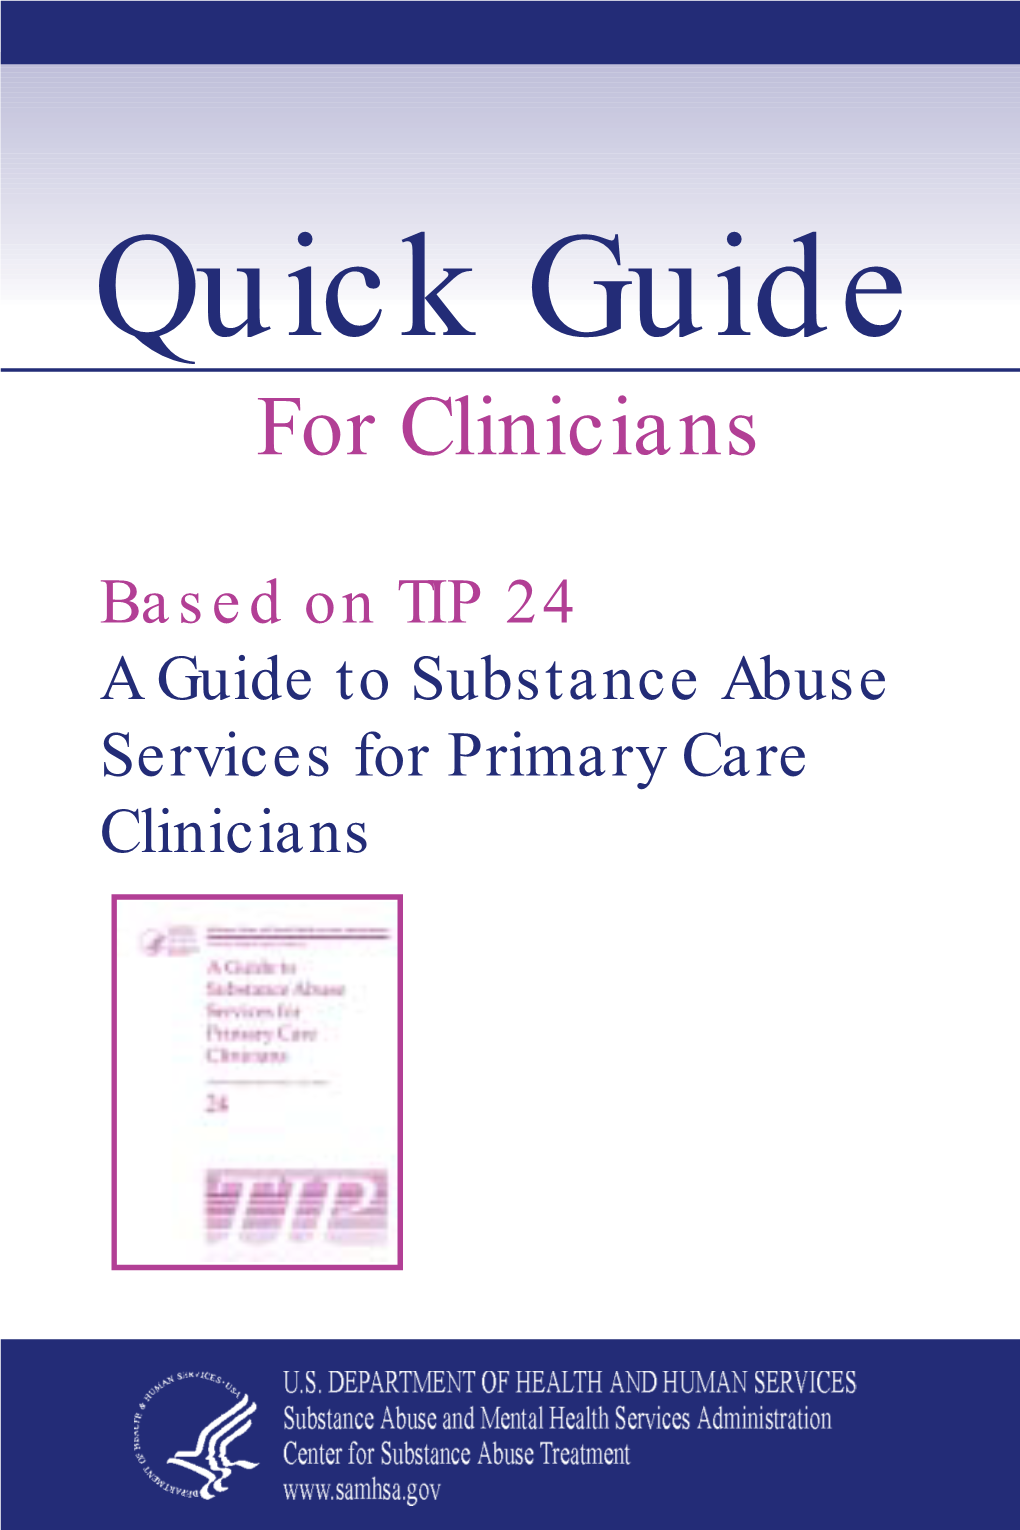 Quick Guide for Clinicians Based on TIP 24—A Guide to Substance